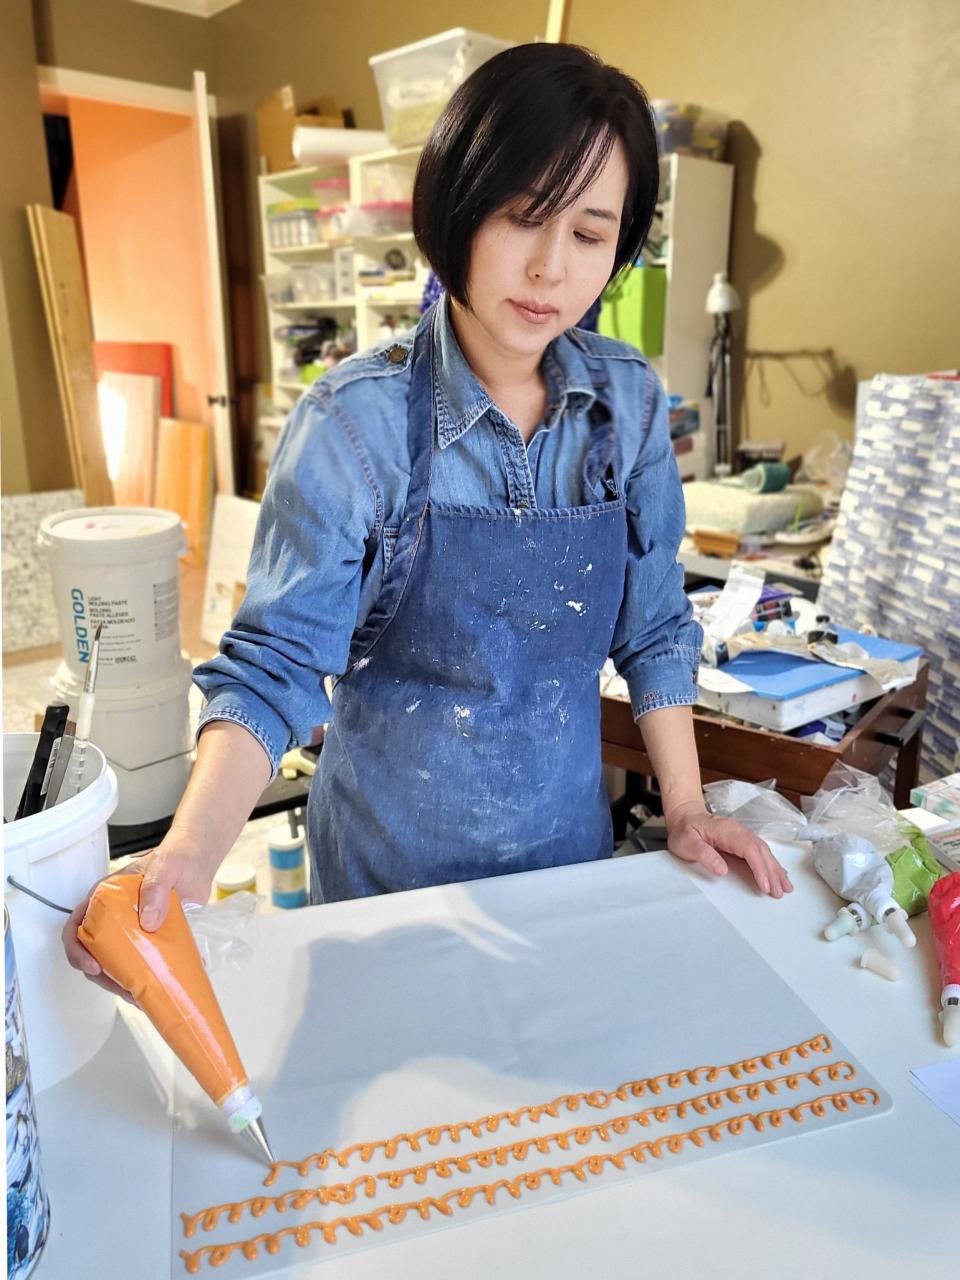 Karam, a Korean American artist based in Edmond, works in her studio. Over the past eight years, she has become known for creating what she calls "unpainted paintings," using a pastry bag rather than a paintbrush to apply a paint mixture to her canvases.